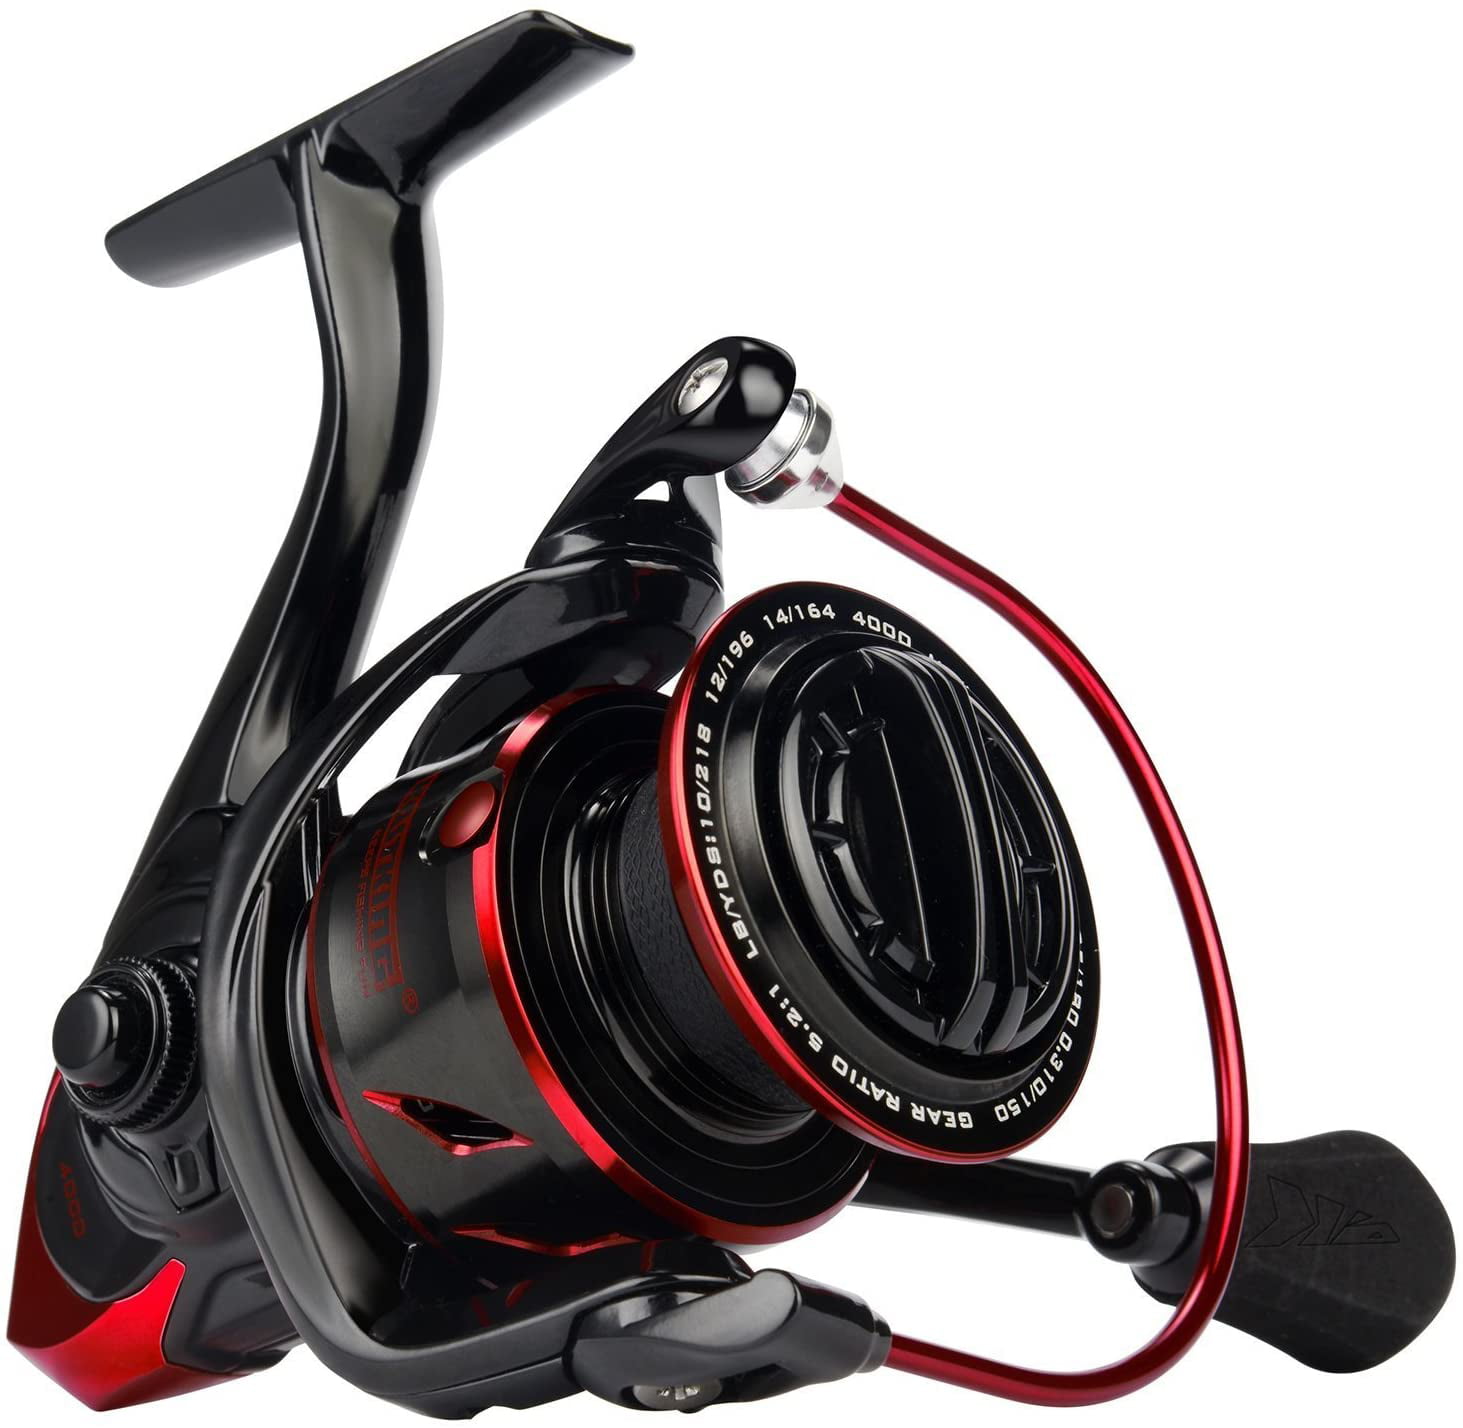 39.5 LB Carbon Fiber Drag,12+1 BB Ultra Smooth All Aluminum Inshore Reel for Saltwater or Freshwater One Bass Fishing reels Light Weight Saltwater Spinning Reel 